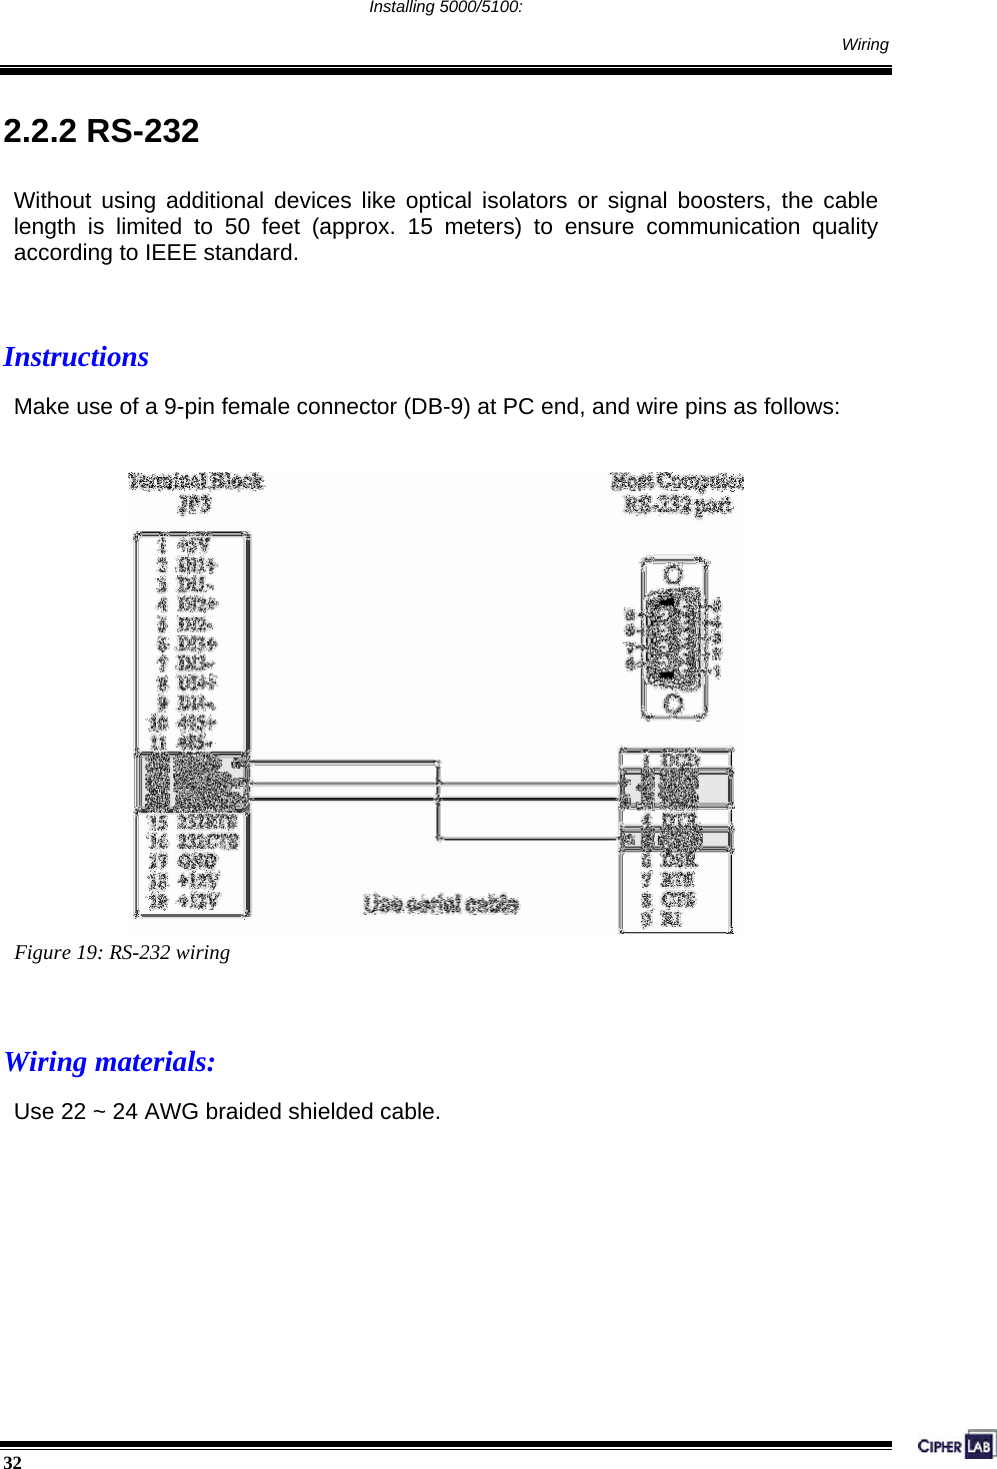  32                                                                                     Installing 5000/5100:    Wiring 2.2.2 RS-232 Without using additional devices like optical isolators or signal boosters, the cable length is limited to 50 feet (approx. 15 meters) to ensure communication quality according to IEEE standard.   Instructions Make use of a 9-pin female connector (DB-9) at PC end, and wire pins as follows:               Figure 19: RS-232 wiring   Wiring materials: Use 22 ~ 24 AWG braided shielded cable.         